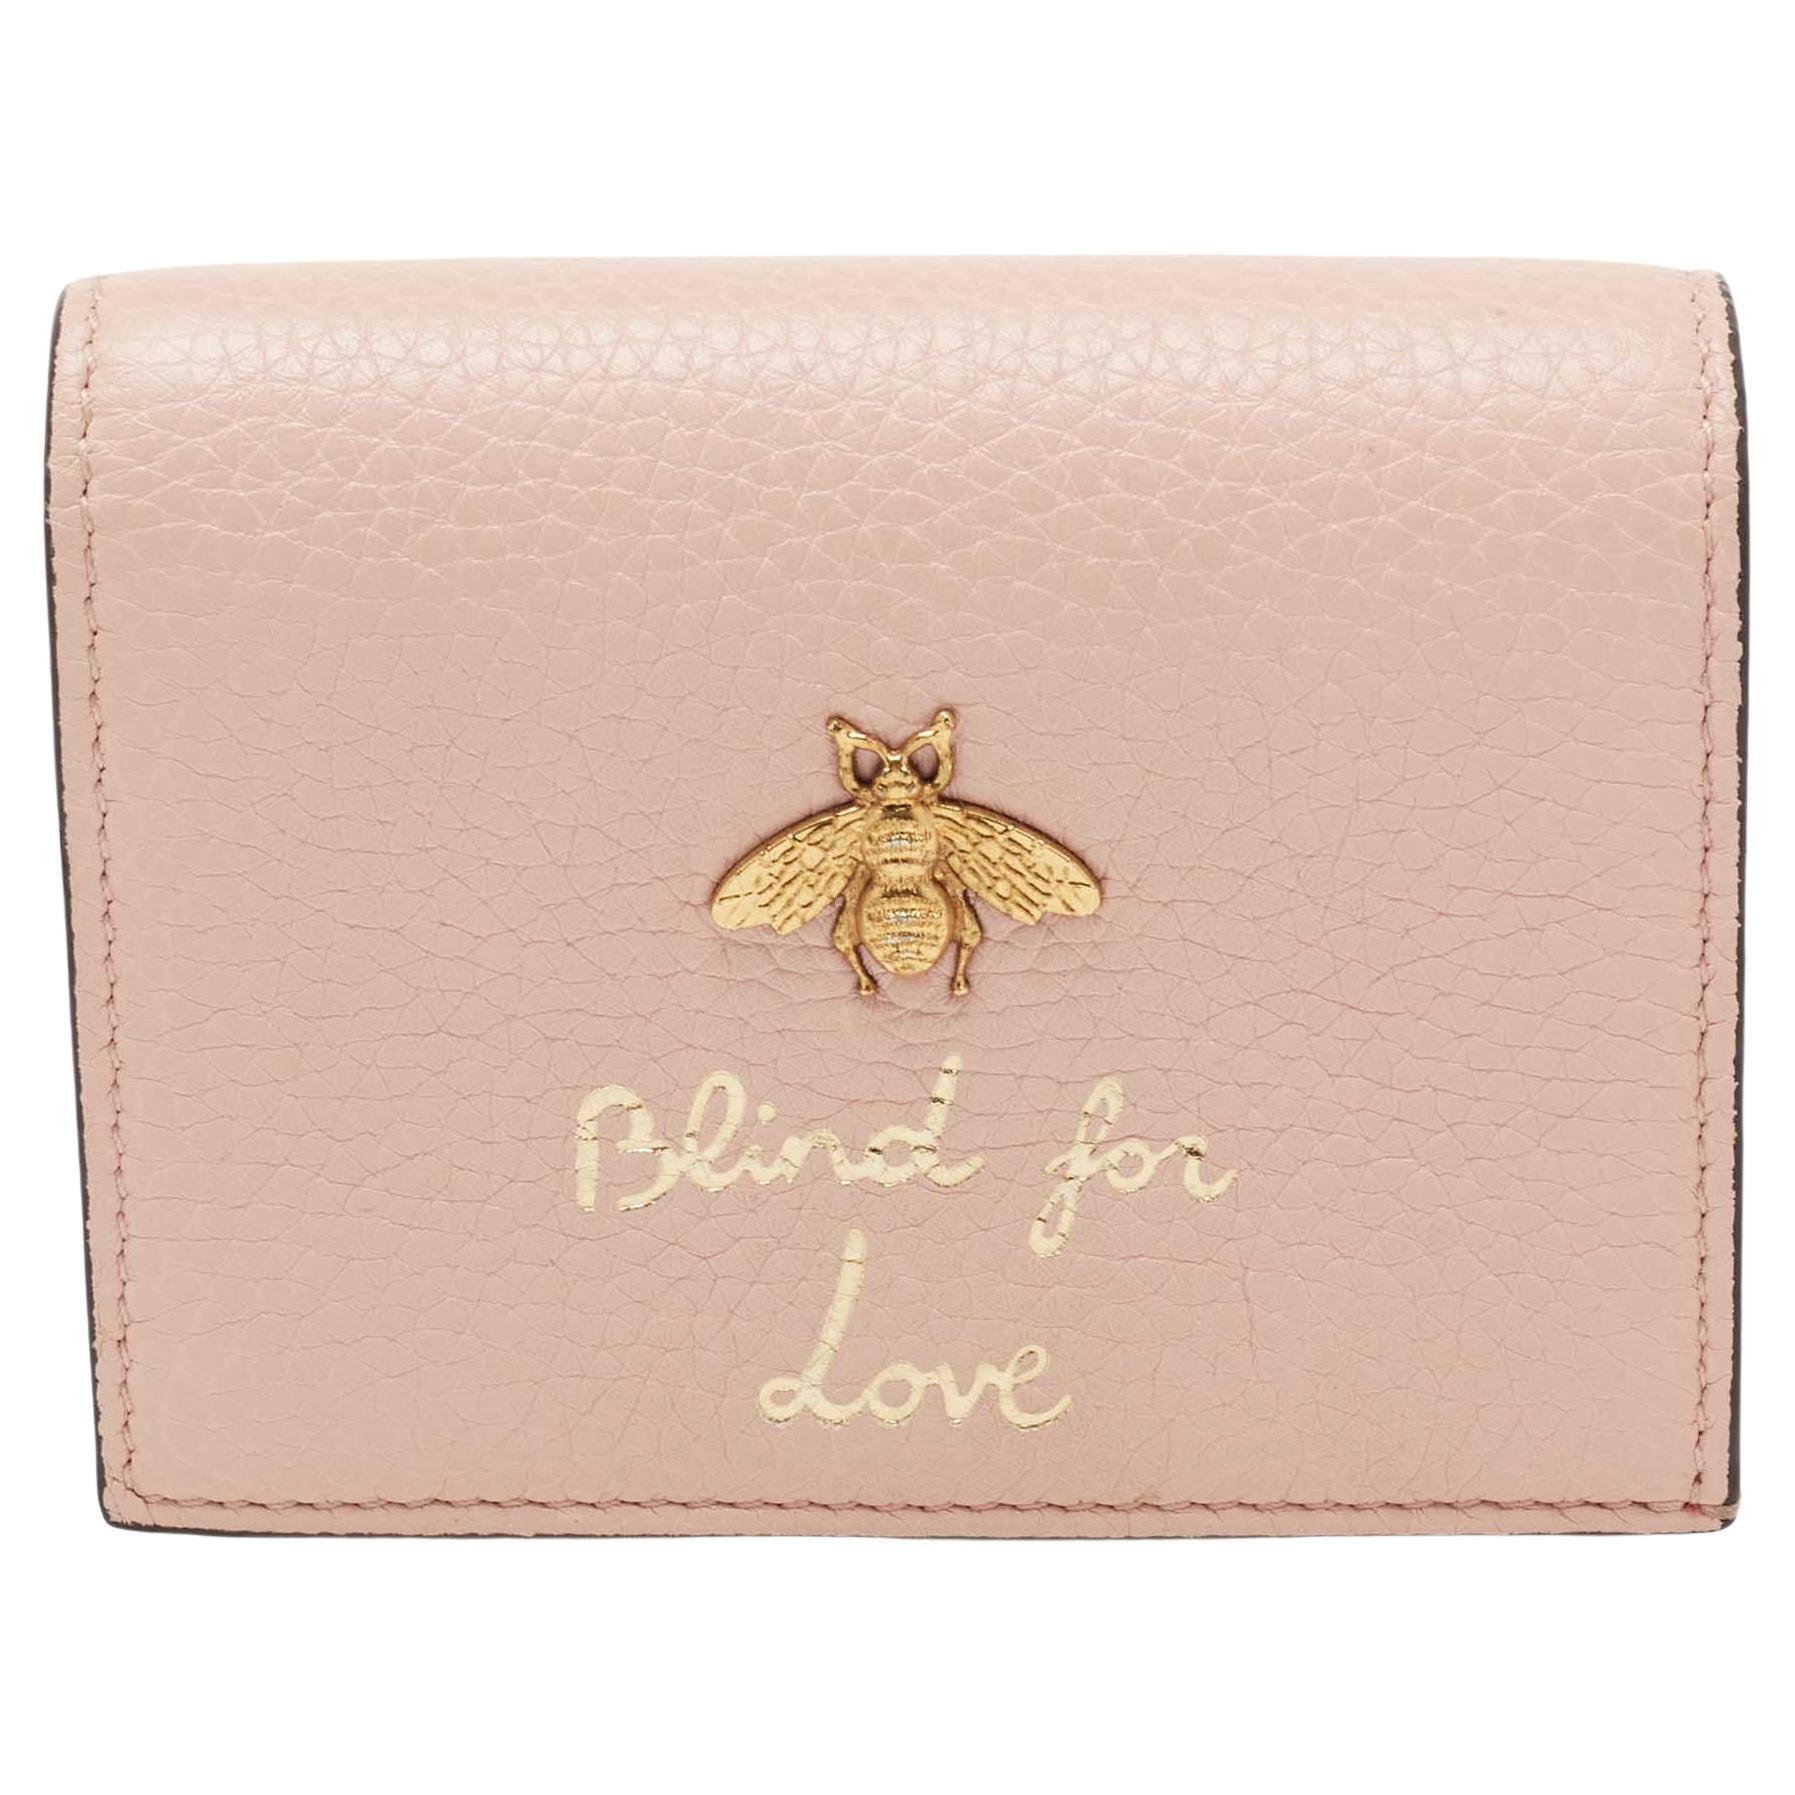 Gucci Light Pink Leather Blind for Love Card Case